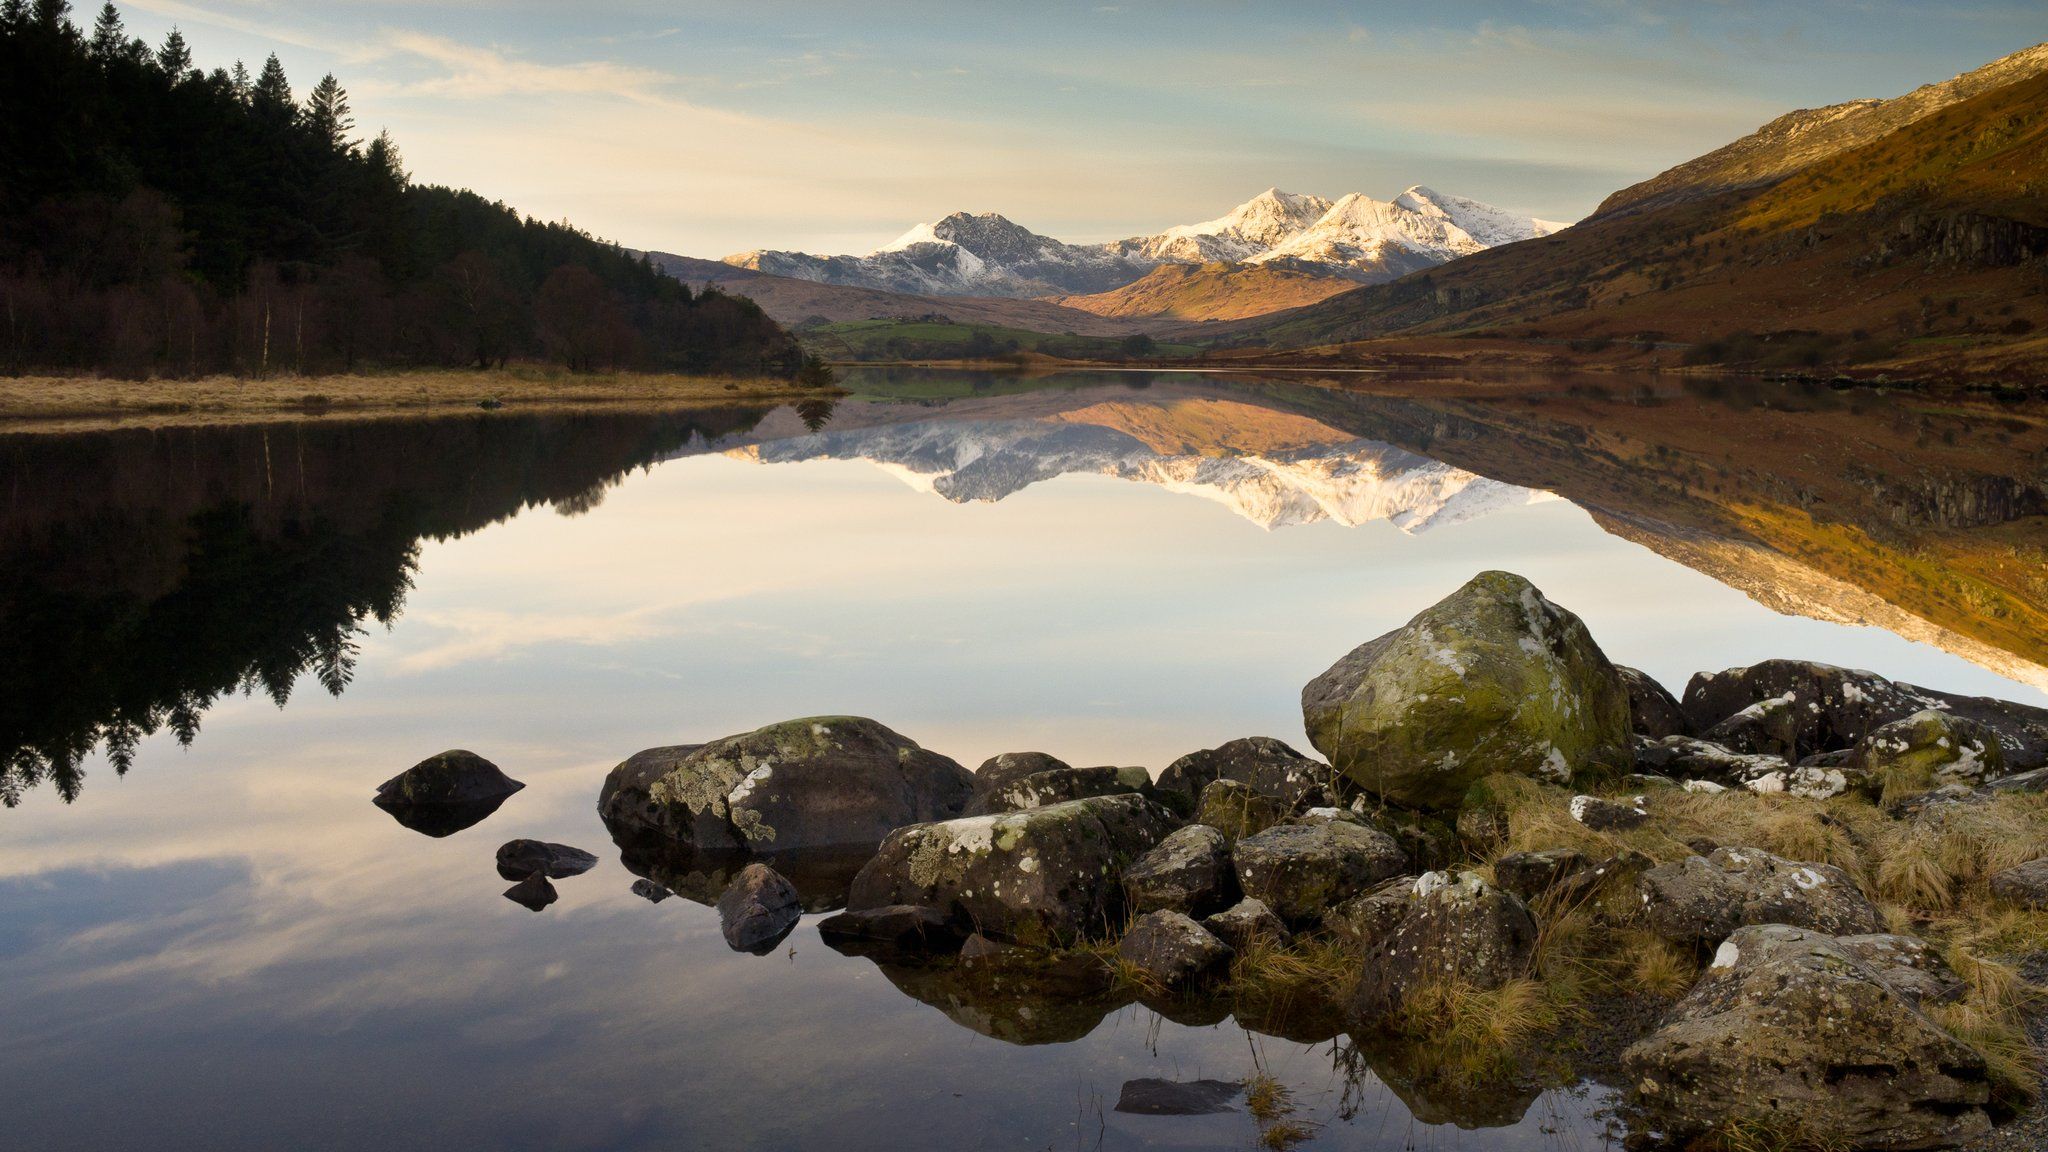 View of Snowdon Horseshoe with Llyn Mymbyr reflection on water in Snowdonia on winter morning